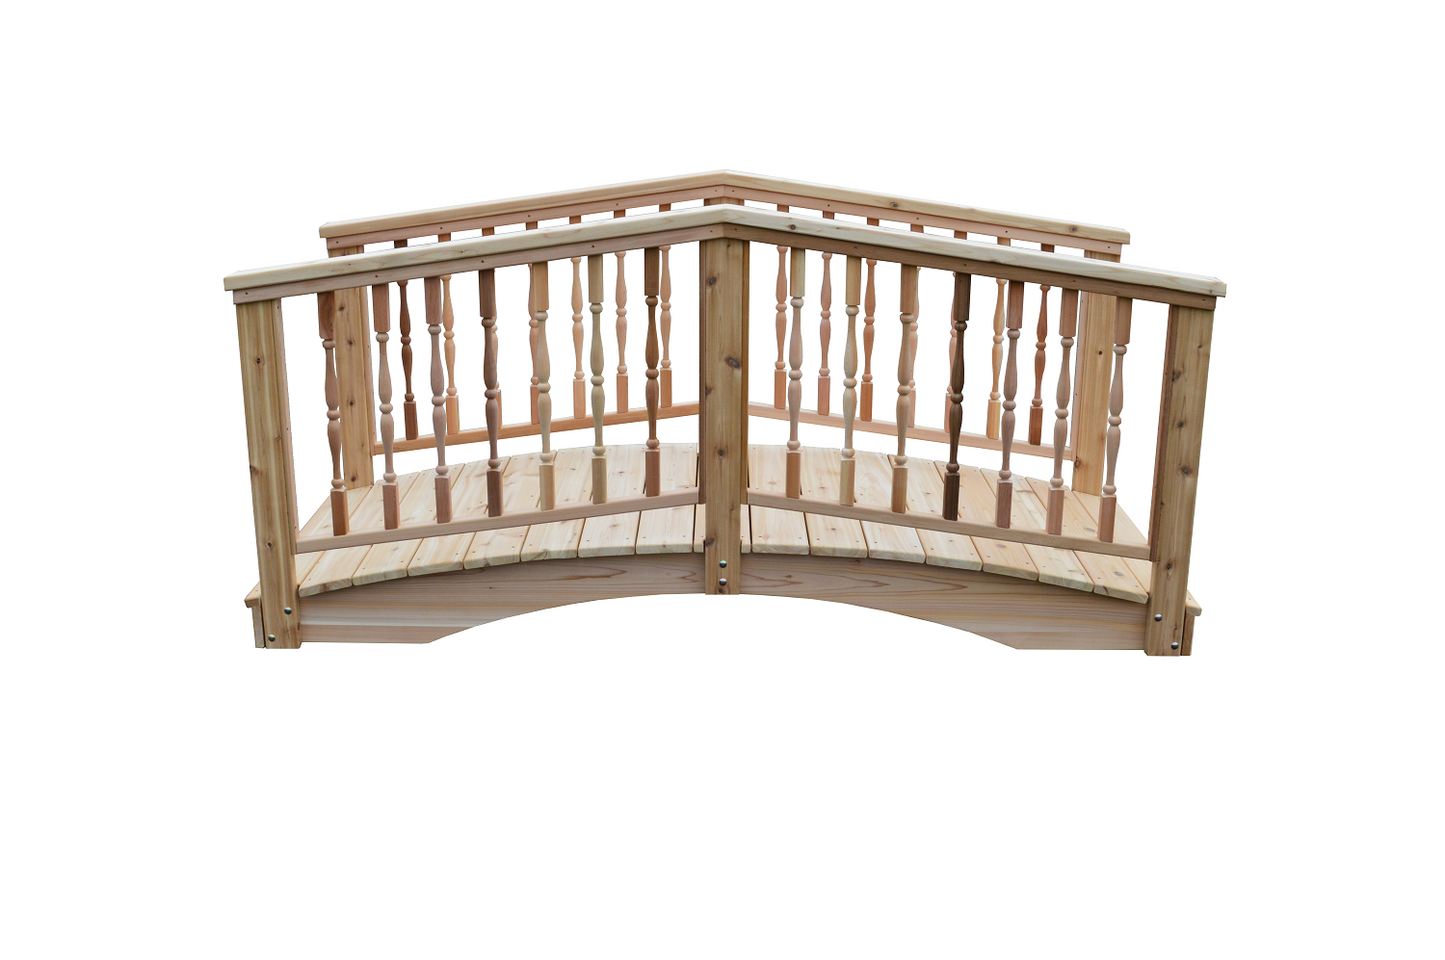 A&L Furniture Co. Western Red Cedar 3' x 8' Spindle Bridge - LEAD TIME TO SHIP 4 WEEKS OR LESS